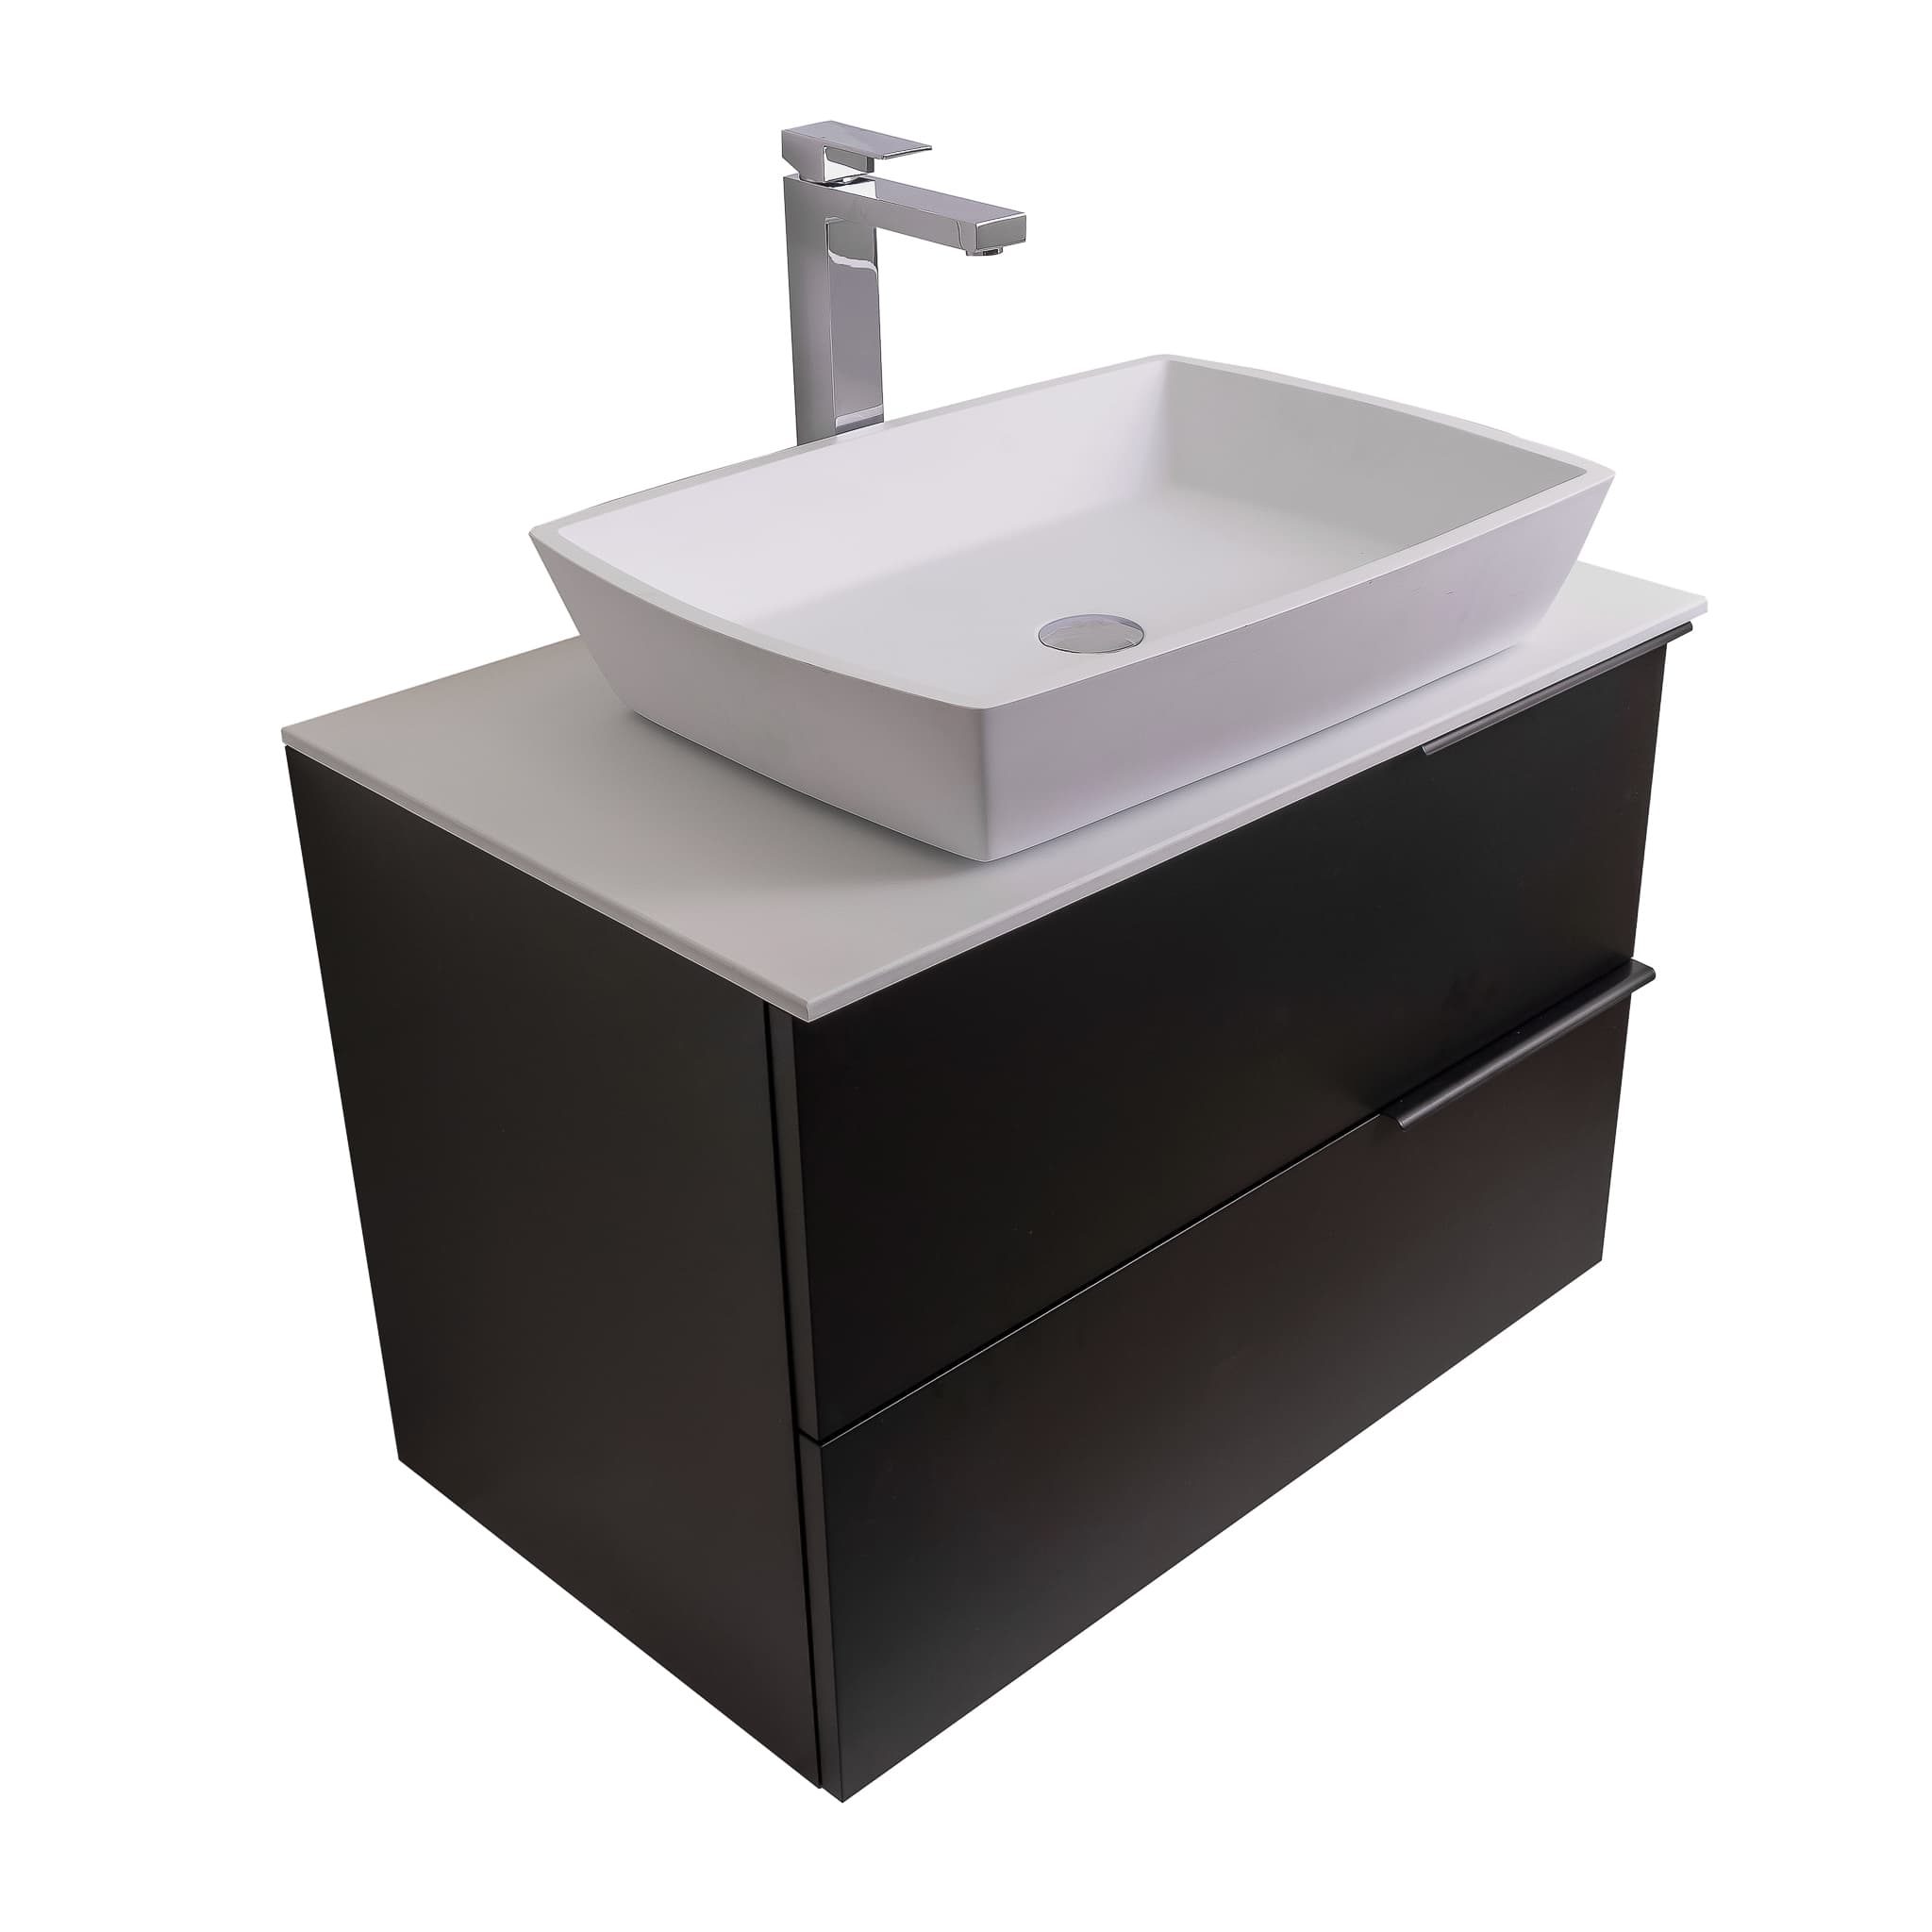 Mallorca 31.5 Matte Black Cabinet, Solid Surface Flat White Counter And Square Solid Surface White Basin 1316, Wall Mounted Modern Vanity Set